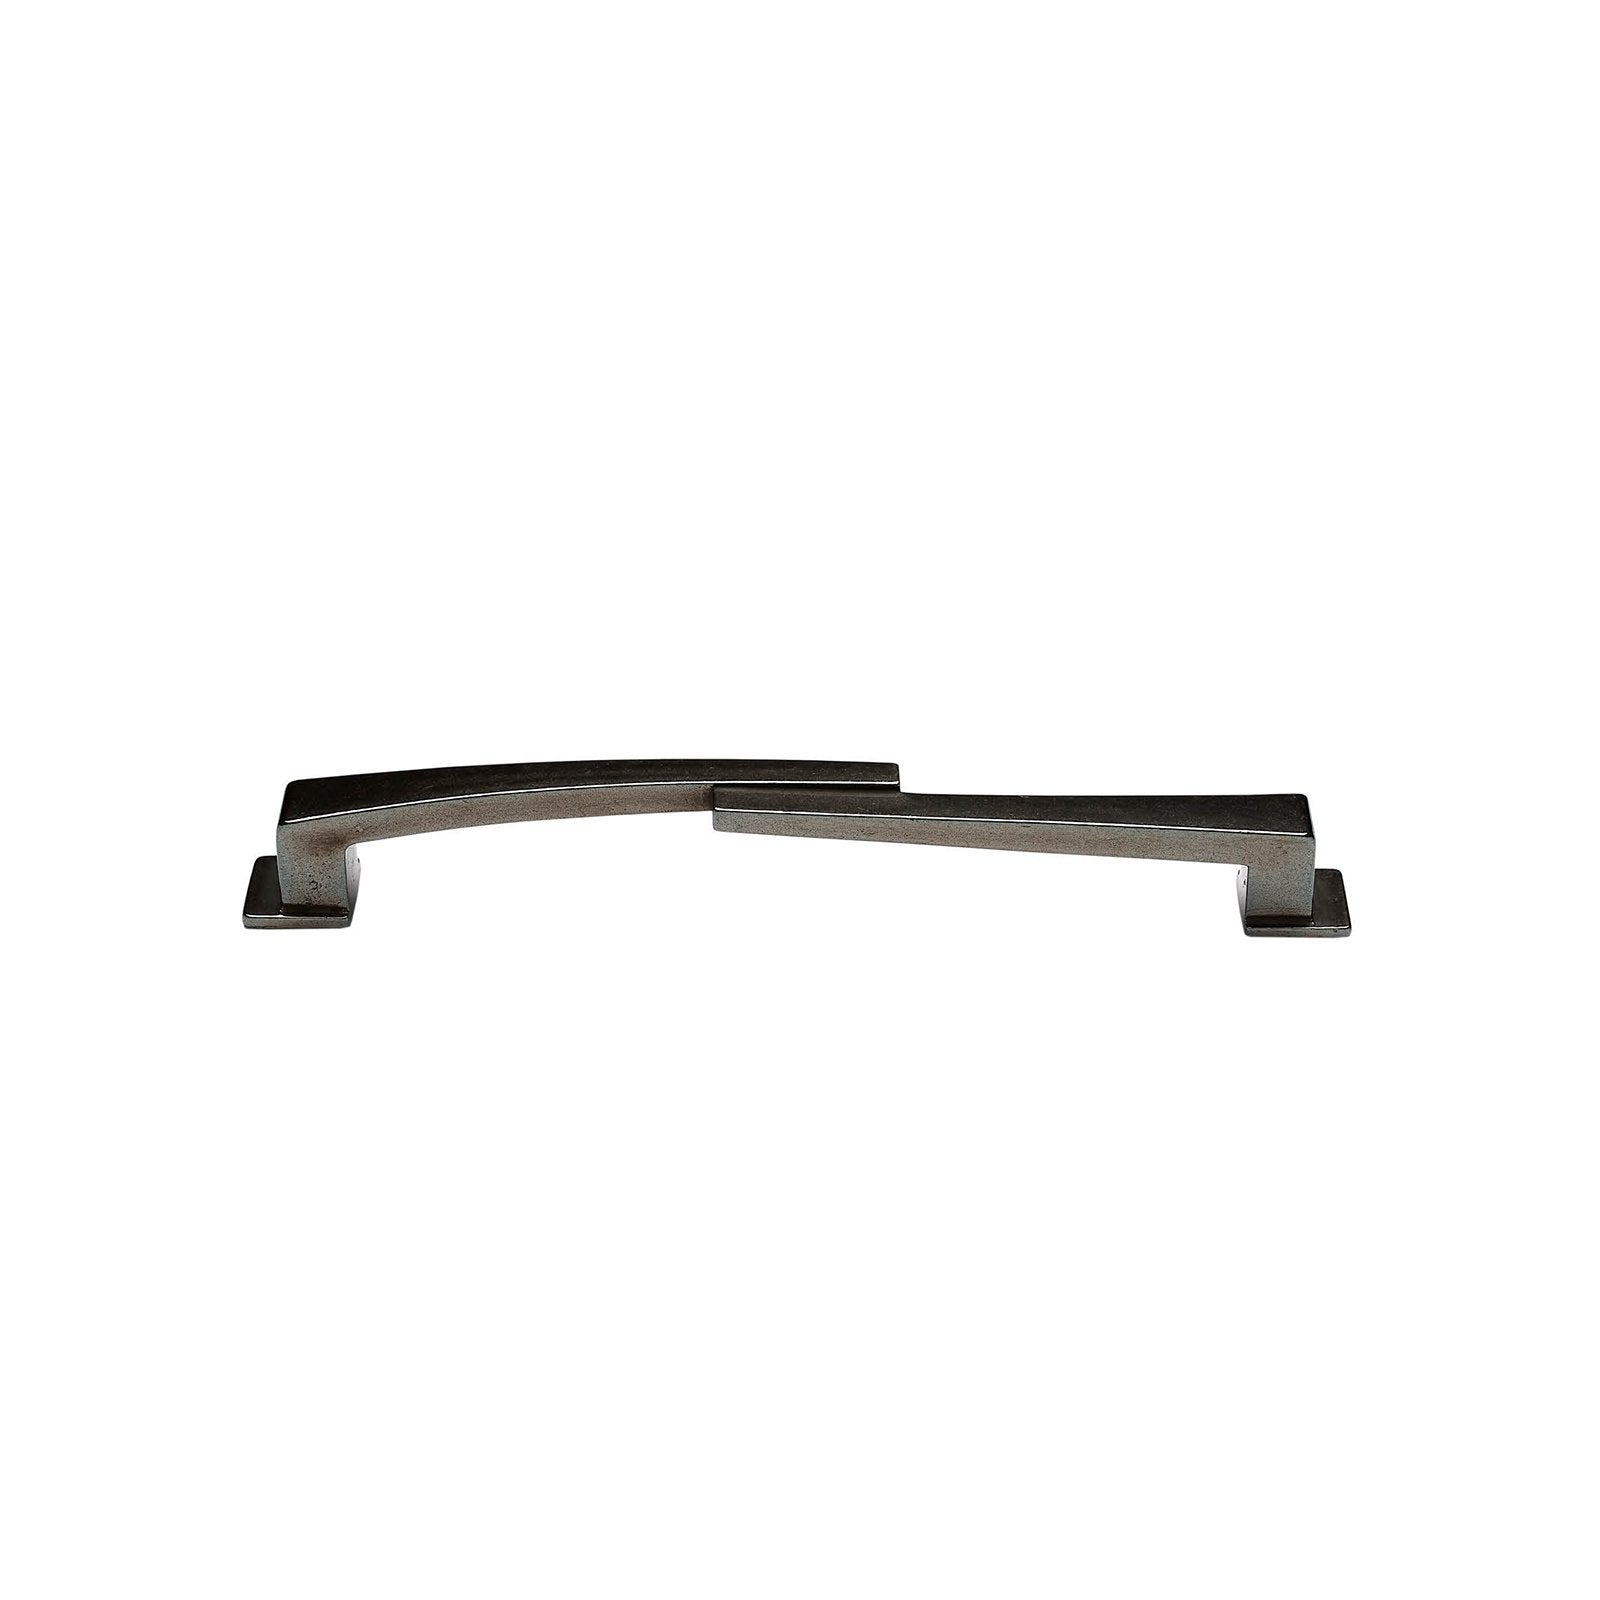 Rocky Mountain Hardware CK20194 - 6 1/8" C-to-C Shift Cabinet Pull